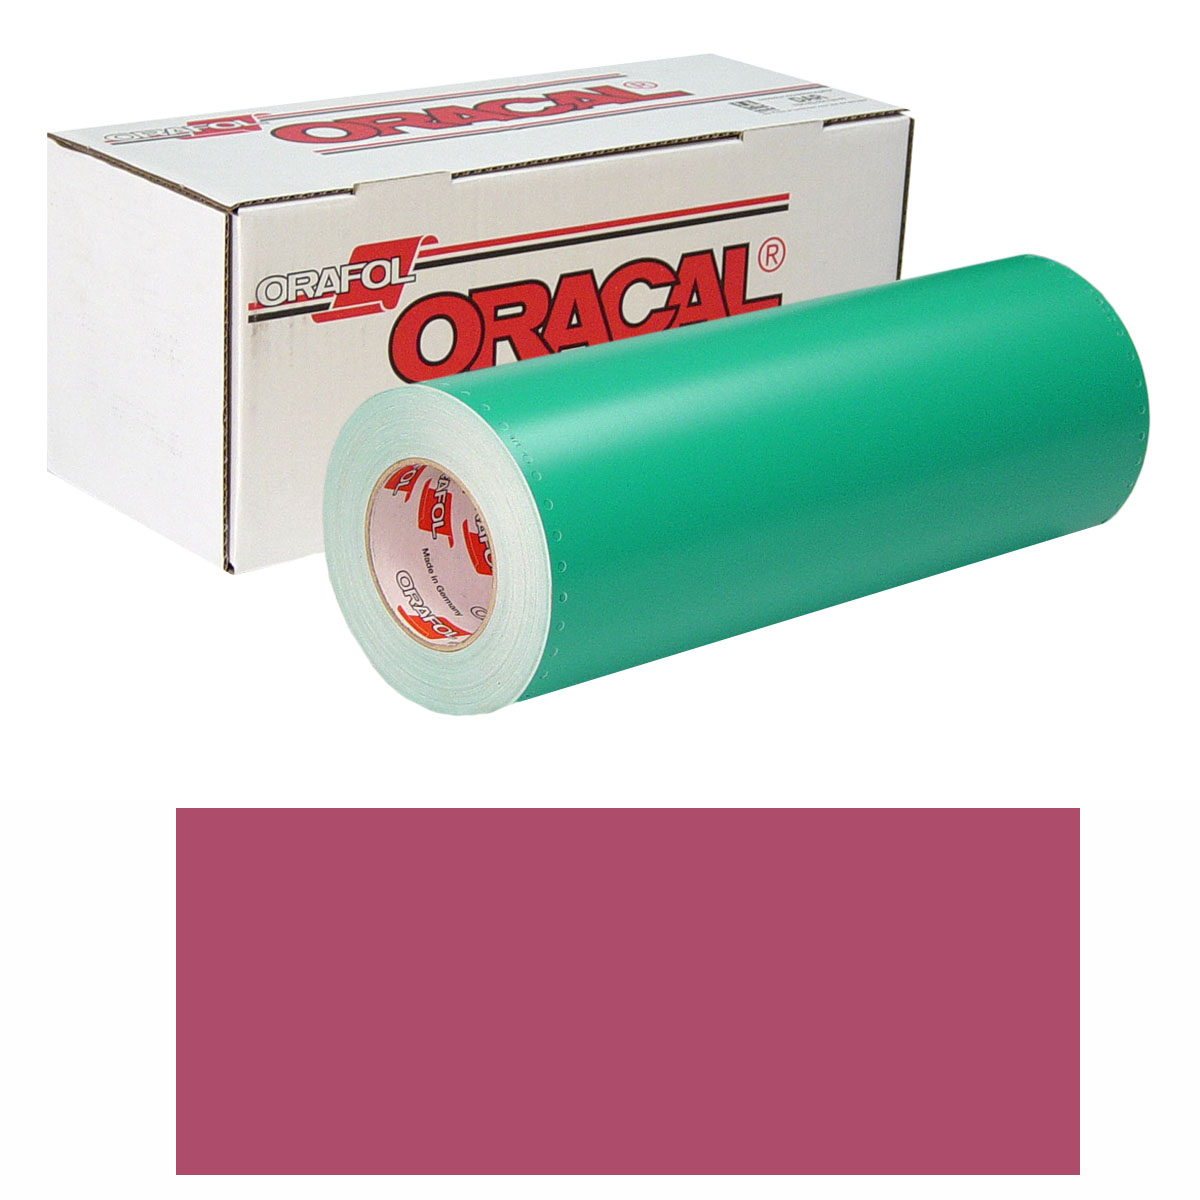 ORACAL 8500 30in X 10yd 008 Heather Red